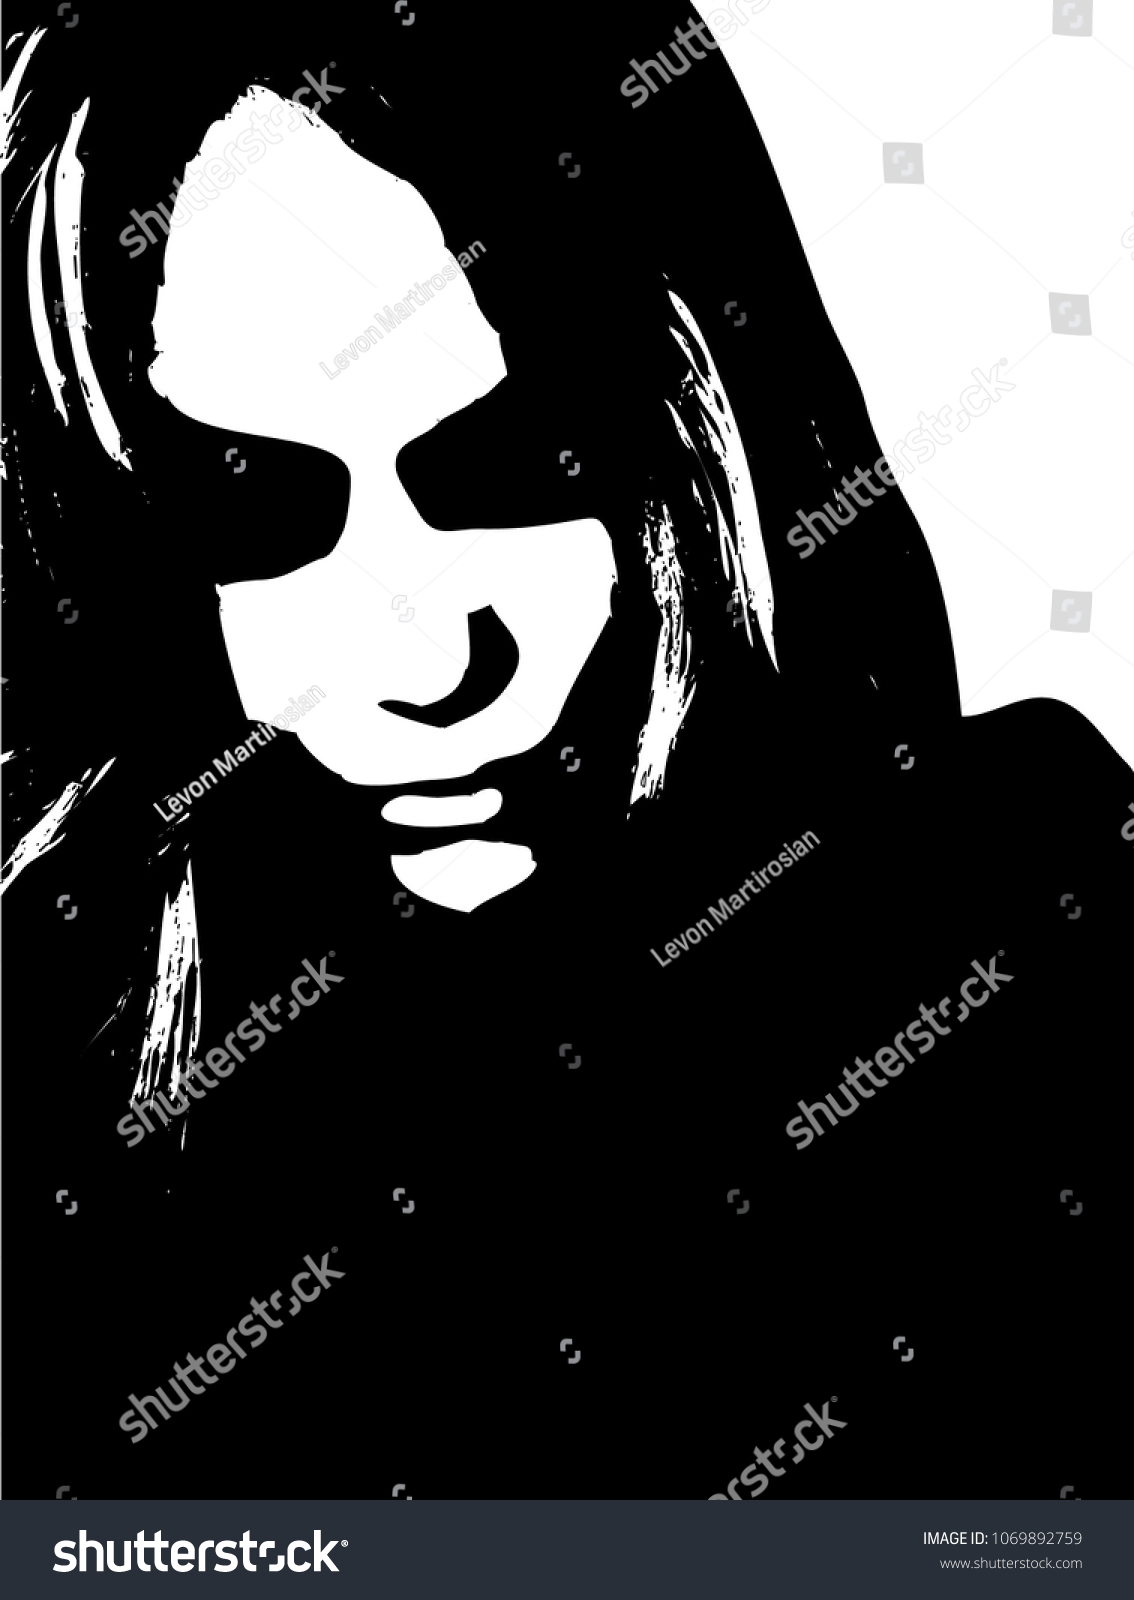 Sexy Young Woman Graffiti Stencil Face Stock Vector Royalty Free 1069892759 Shutterstock 6770